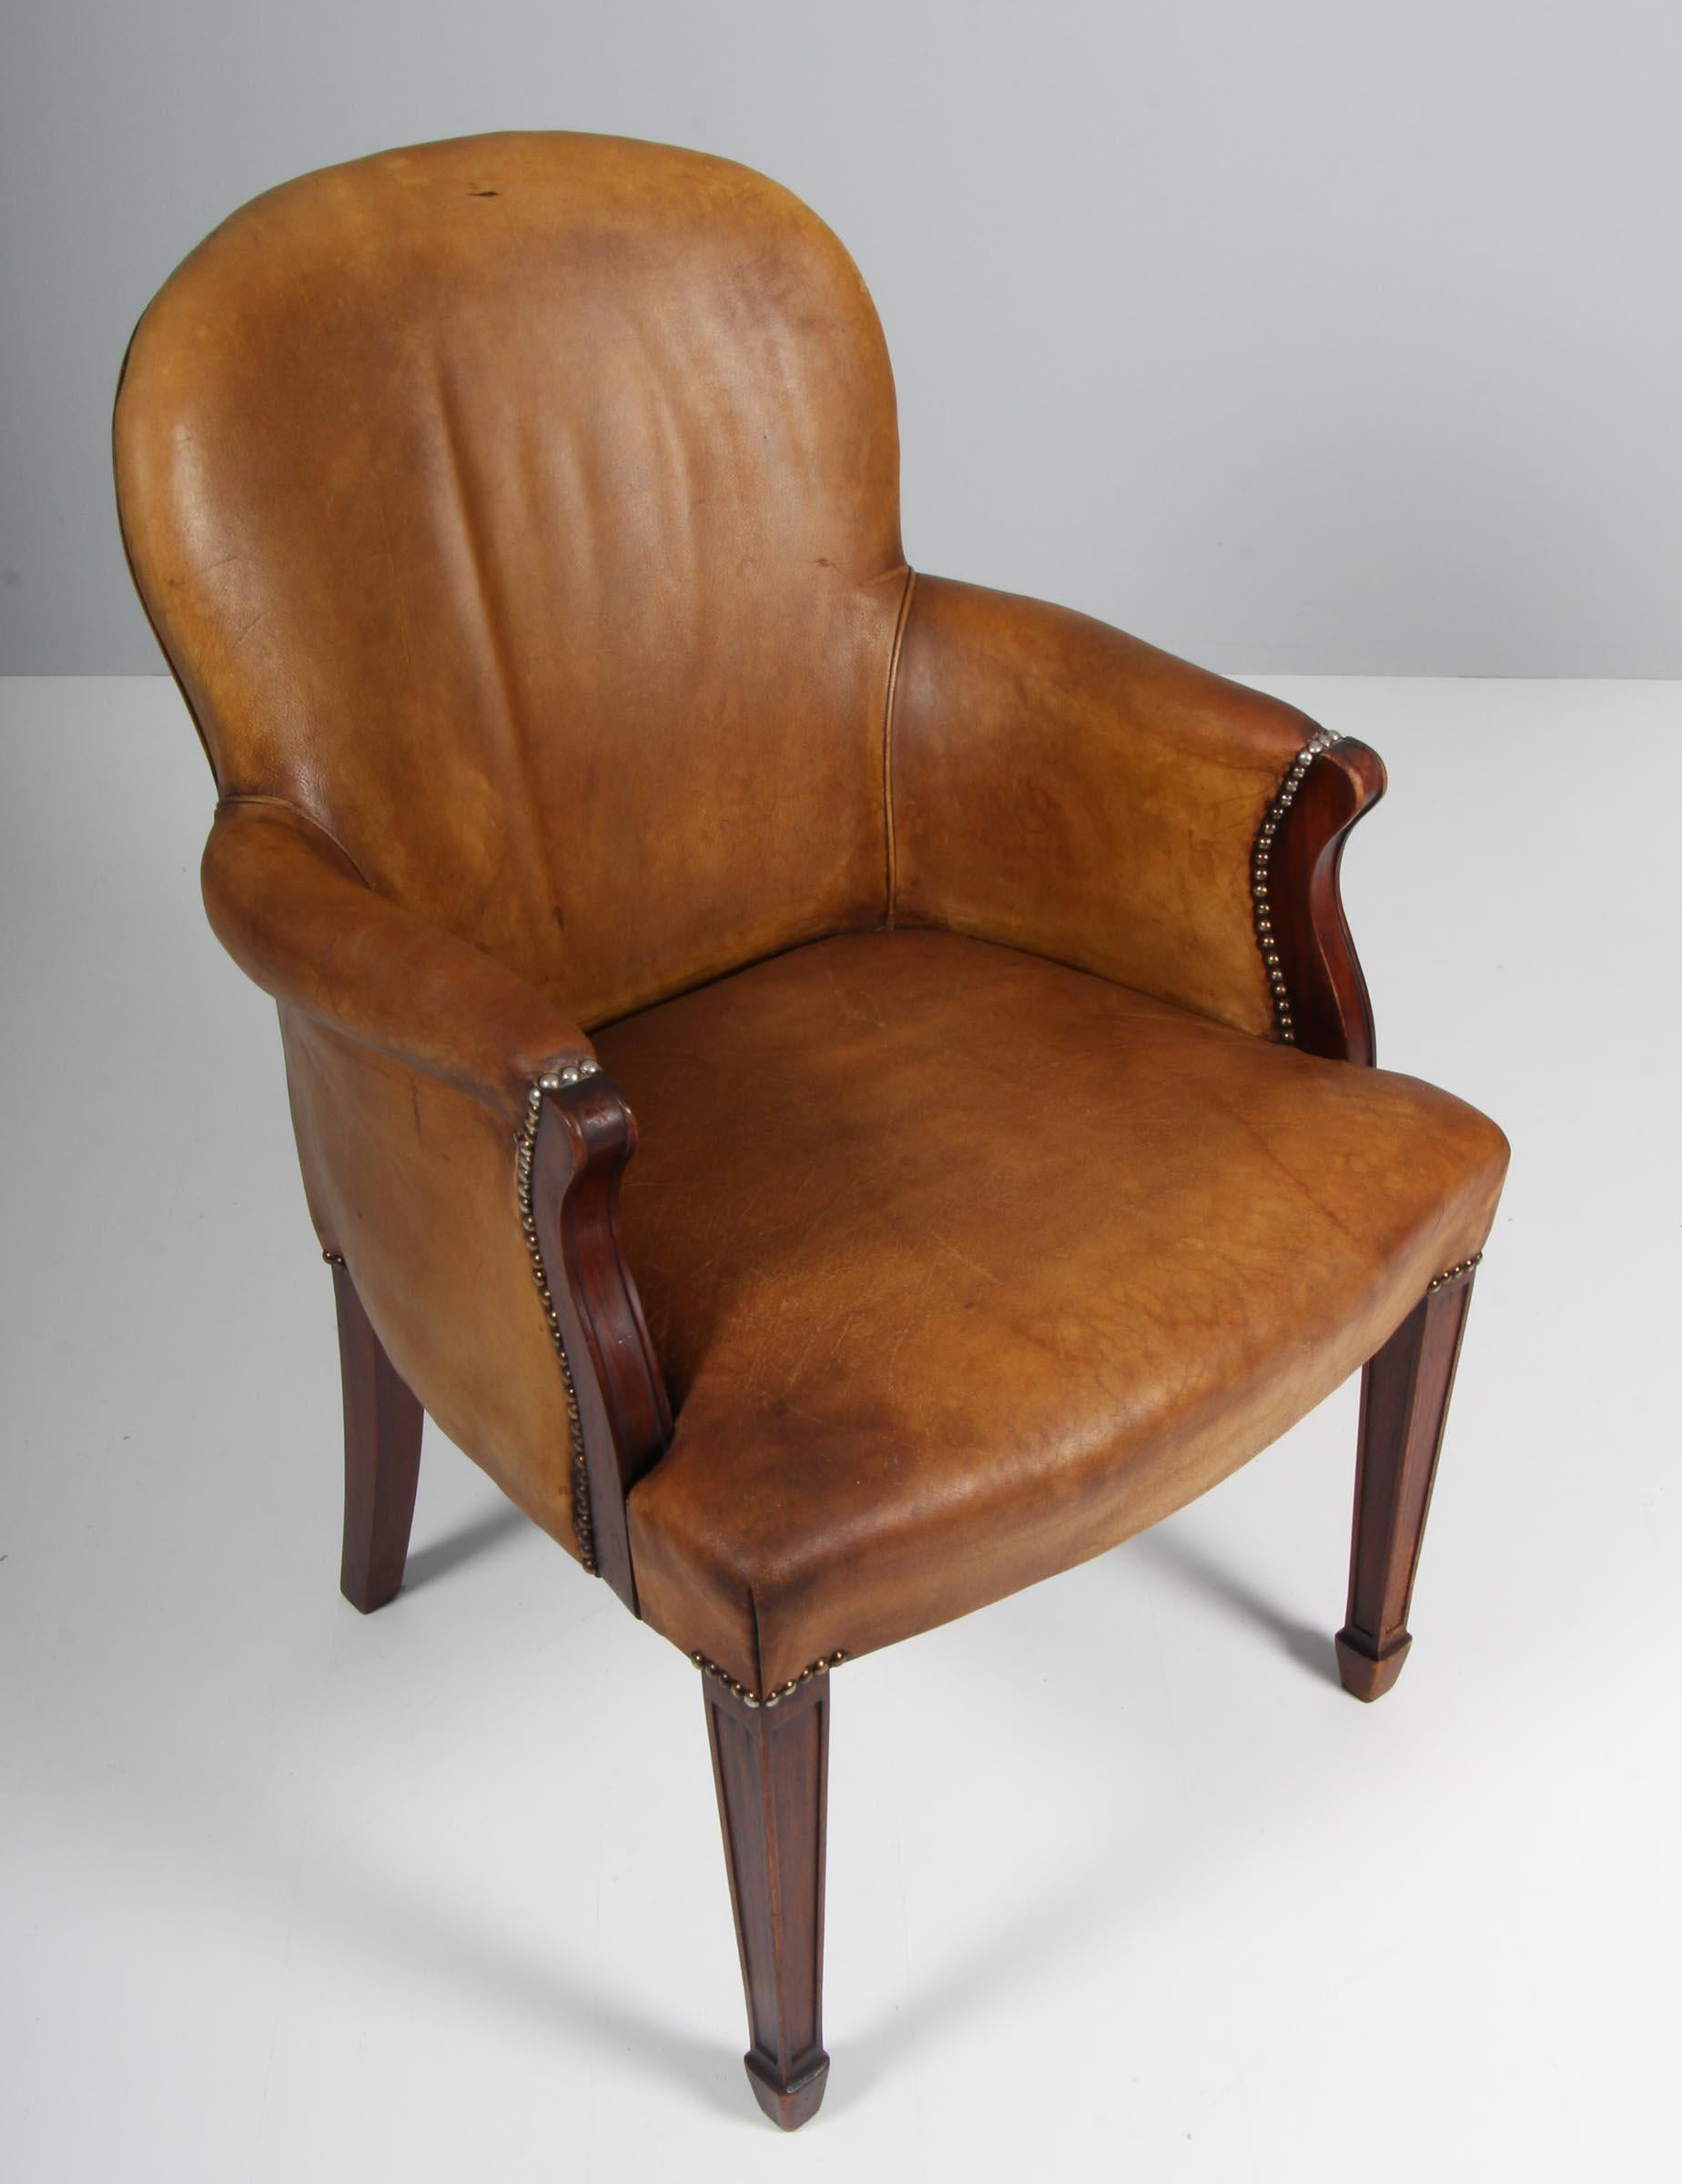 Frits Henningsen lounge chair original upholstered with patinated leather.

Legs of mahogany.

Made in the 1940s.

